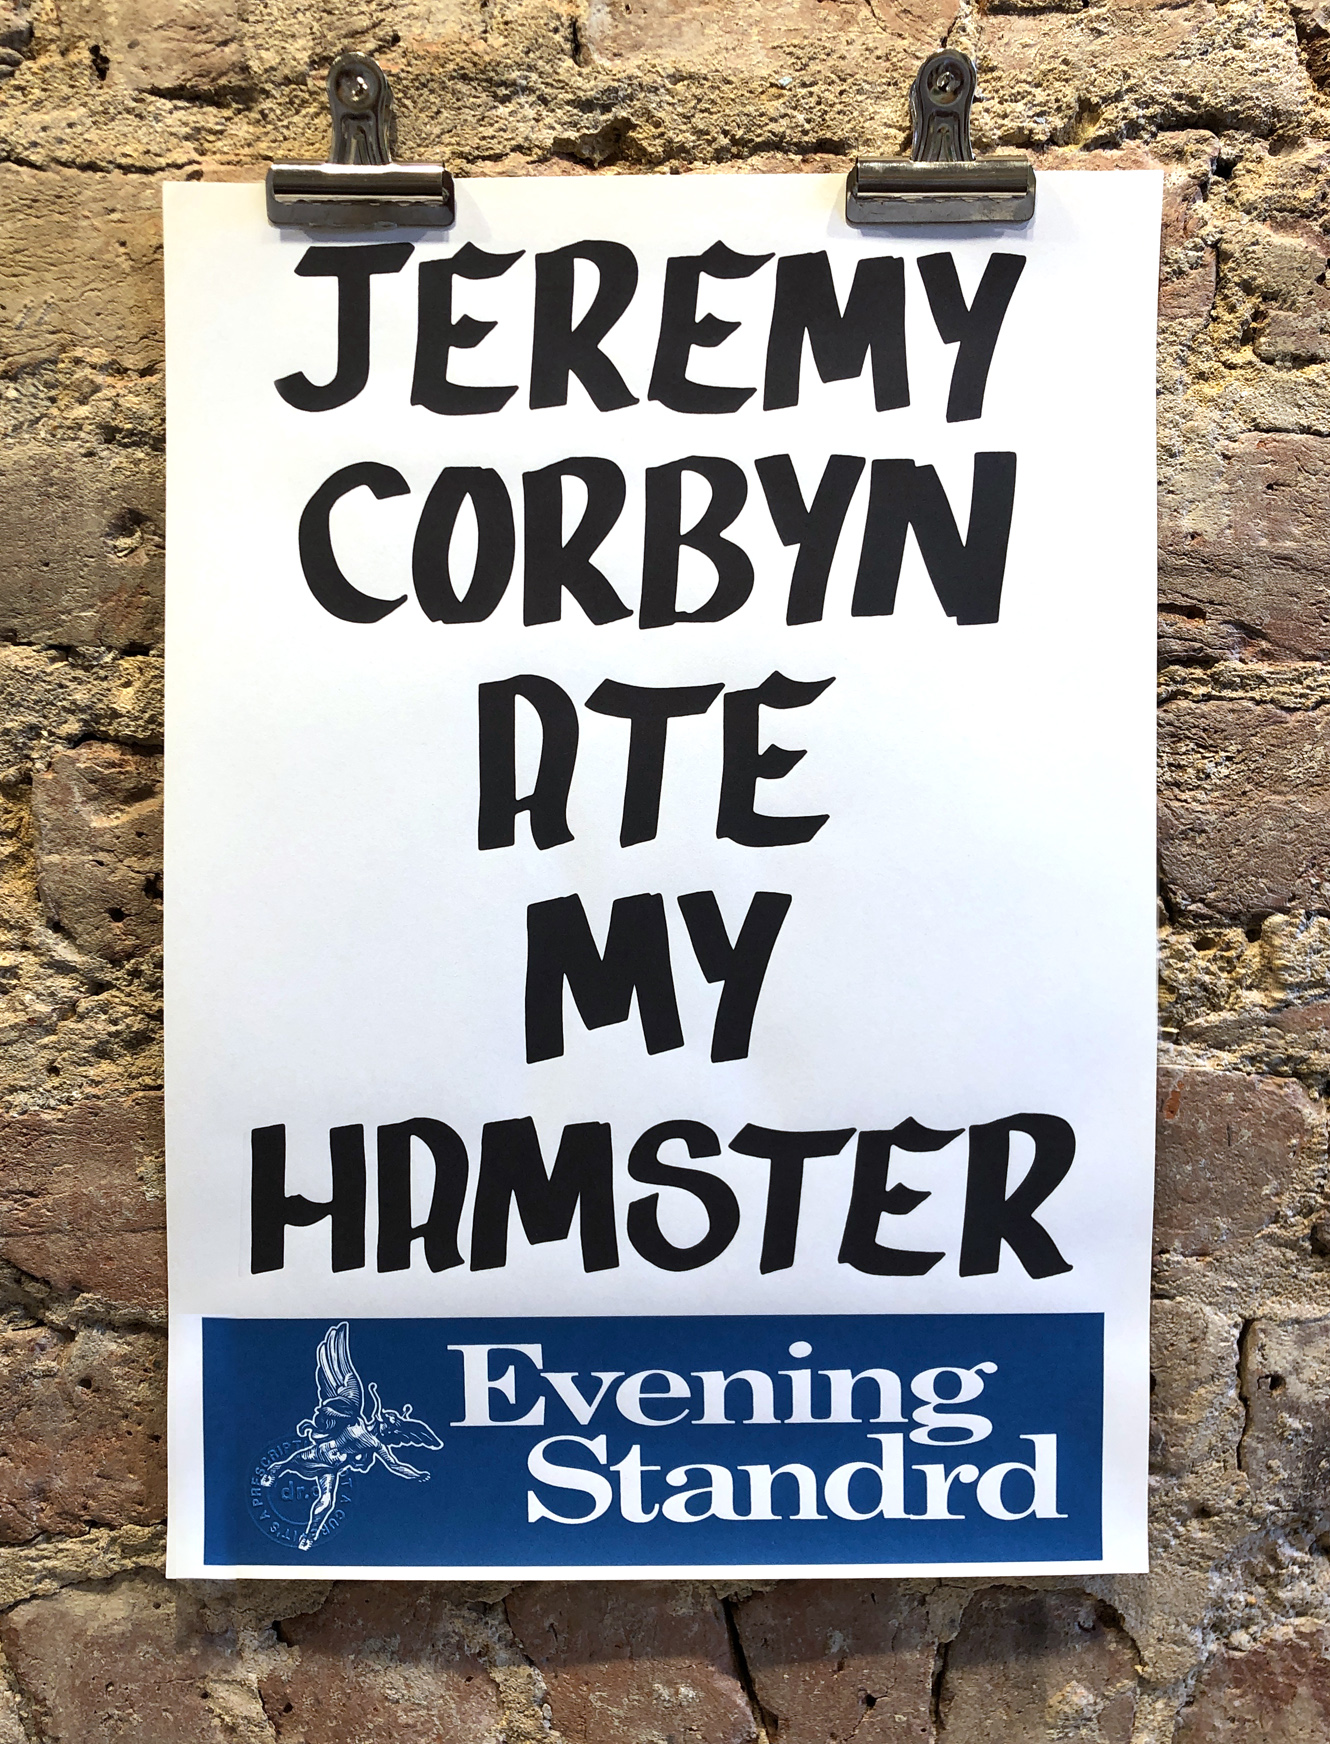 Jeremy Corbyn Ate My Hamster by Dr D. - Nelly Duff